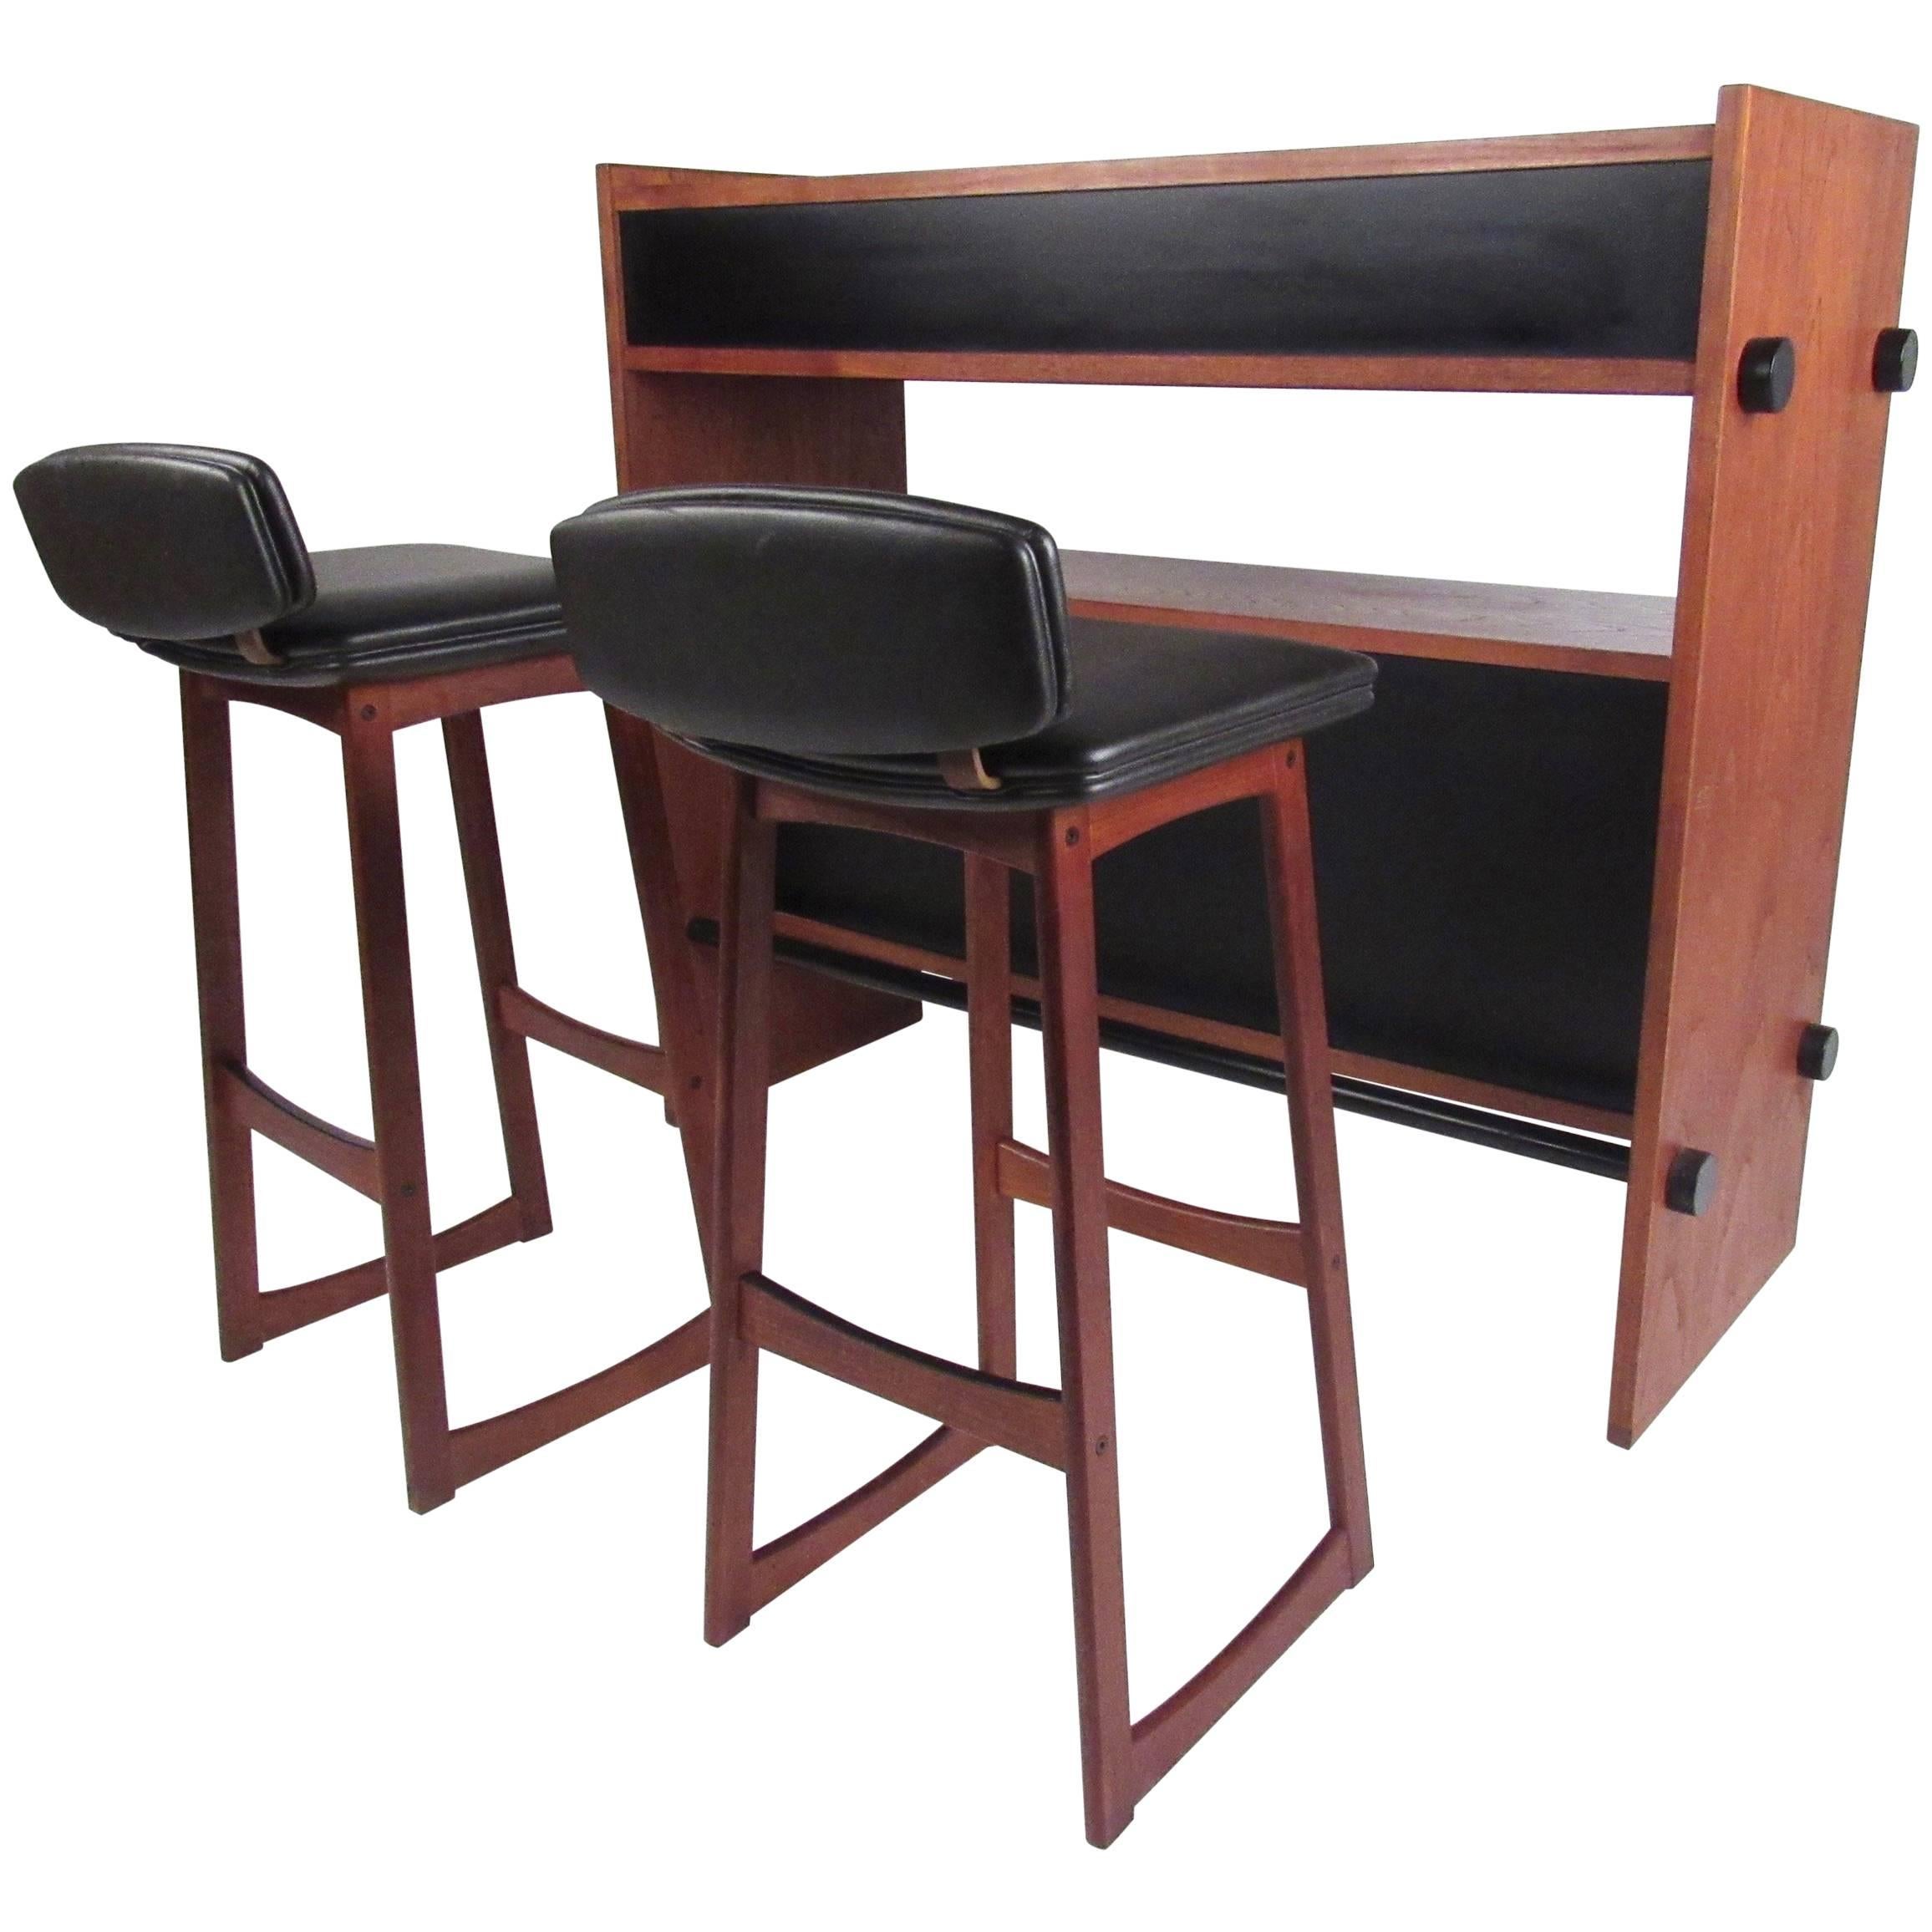  Scandinavian Modern Dry Bar with Low Back Stools in Teak For Sale